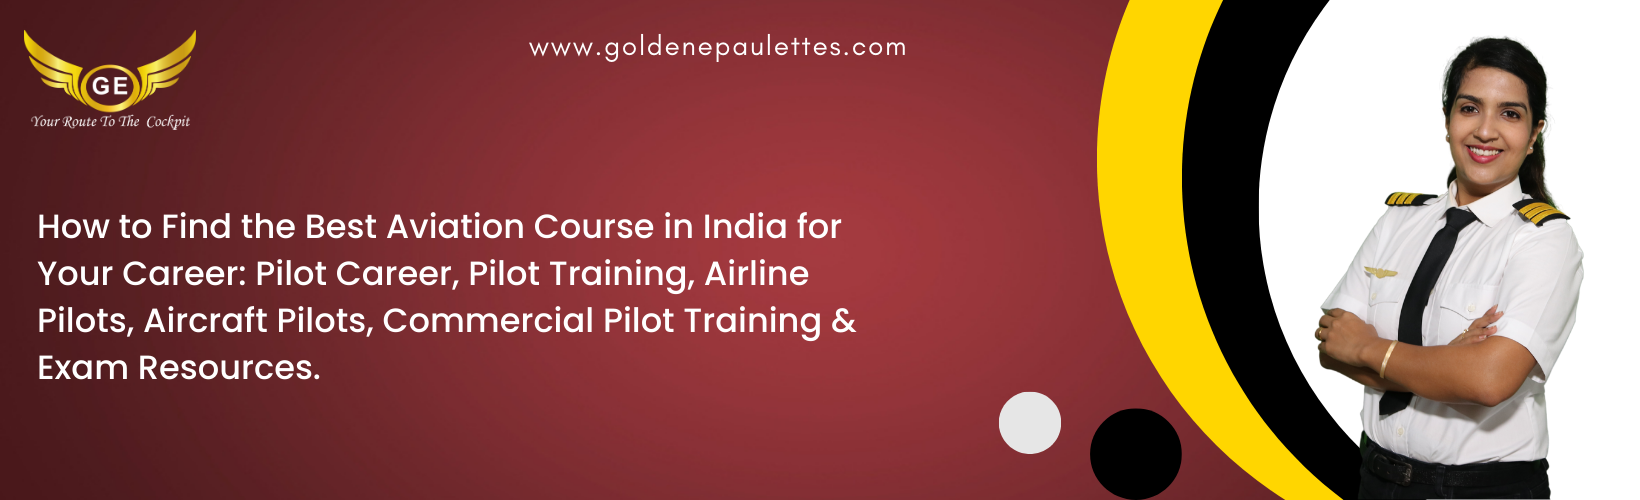 How to Choose the Right Aviation Course in India